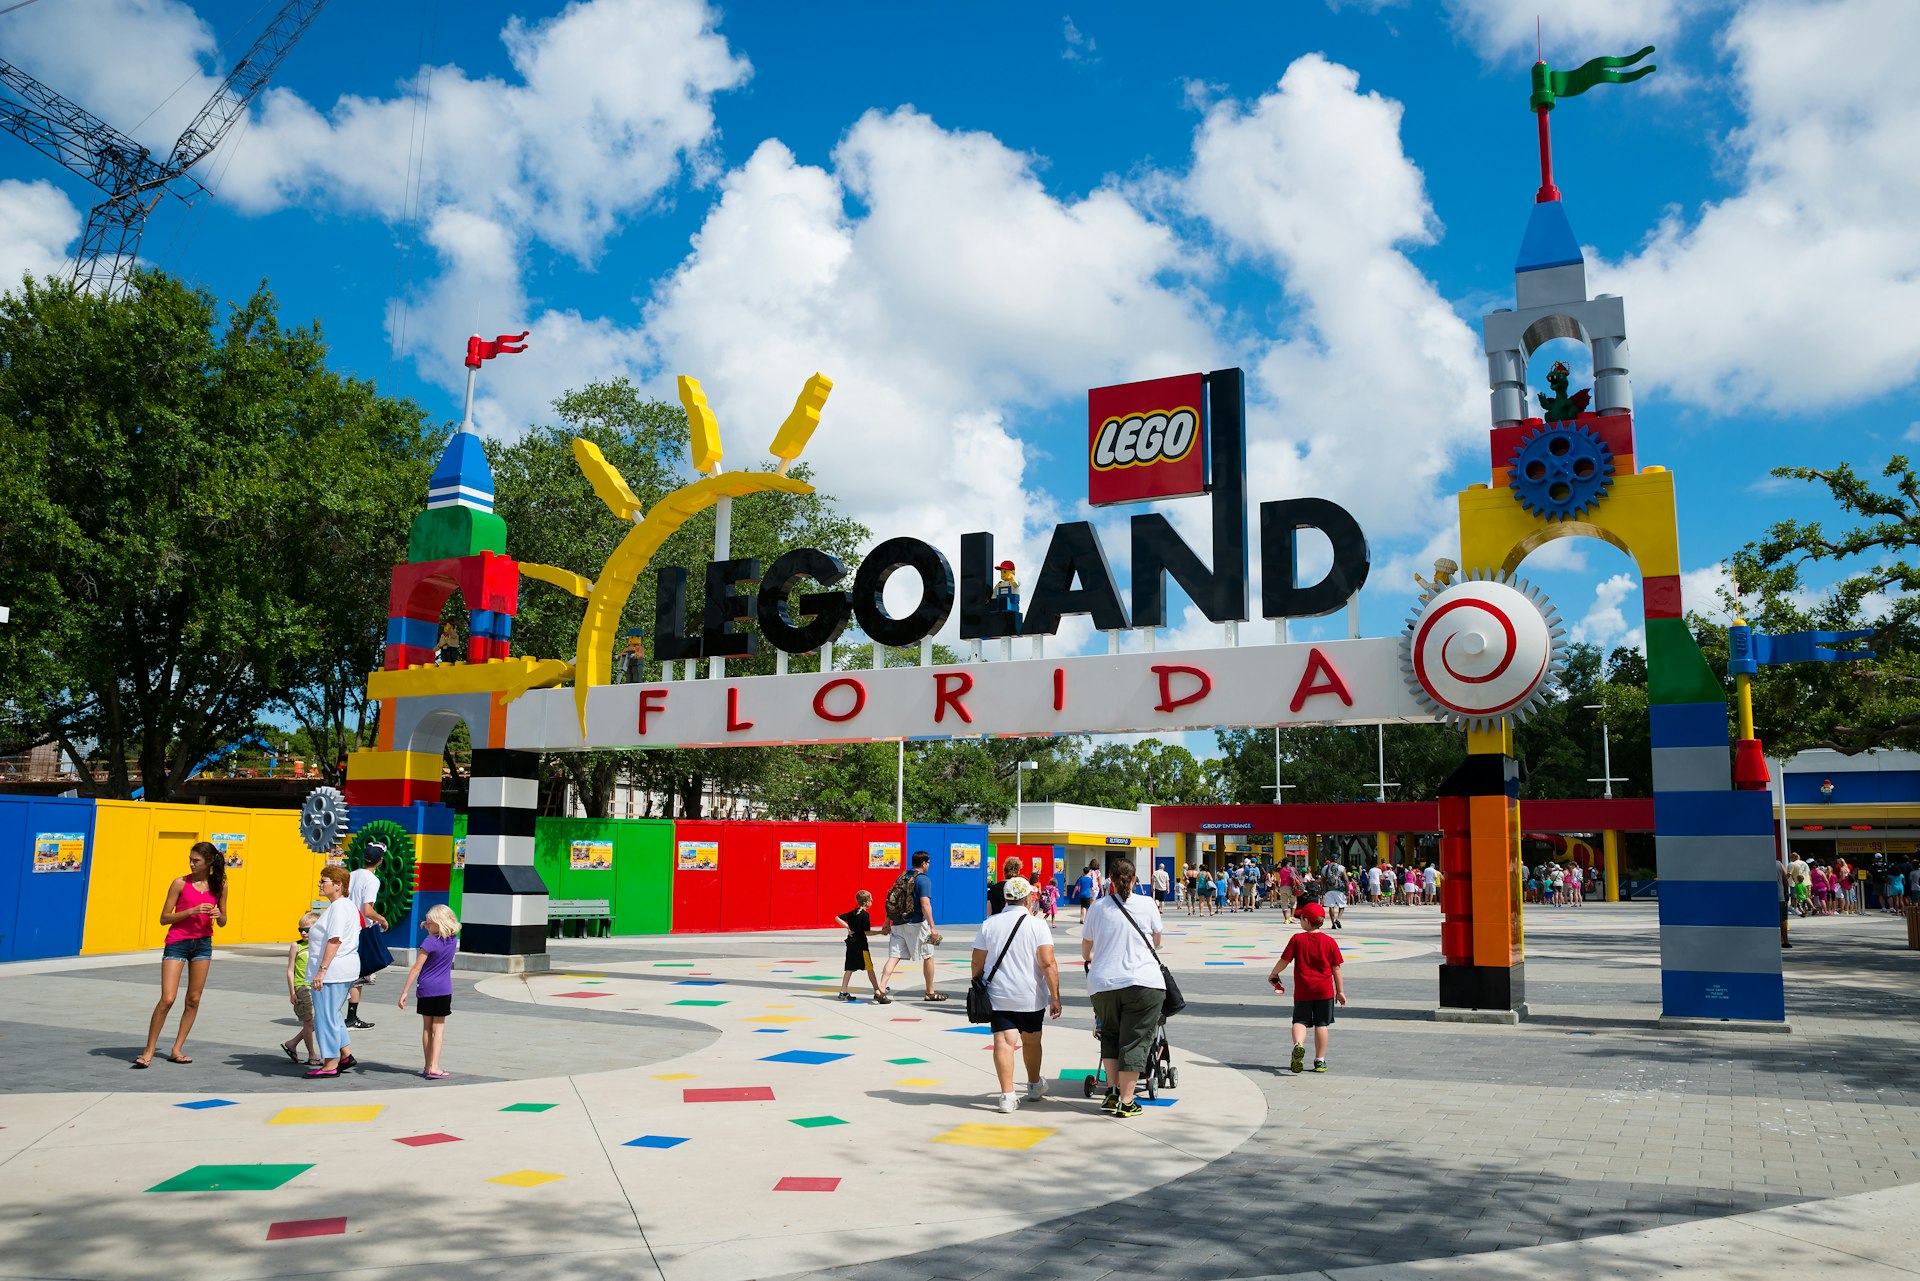 Visitors pass through the entrance to Legoland Florida in Winter Haven